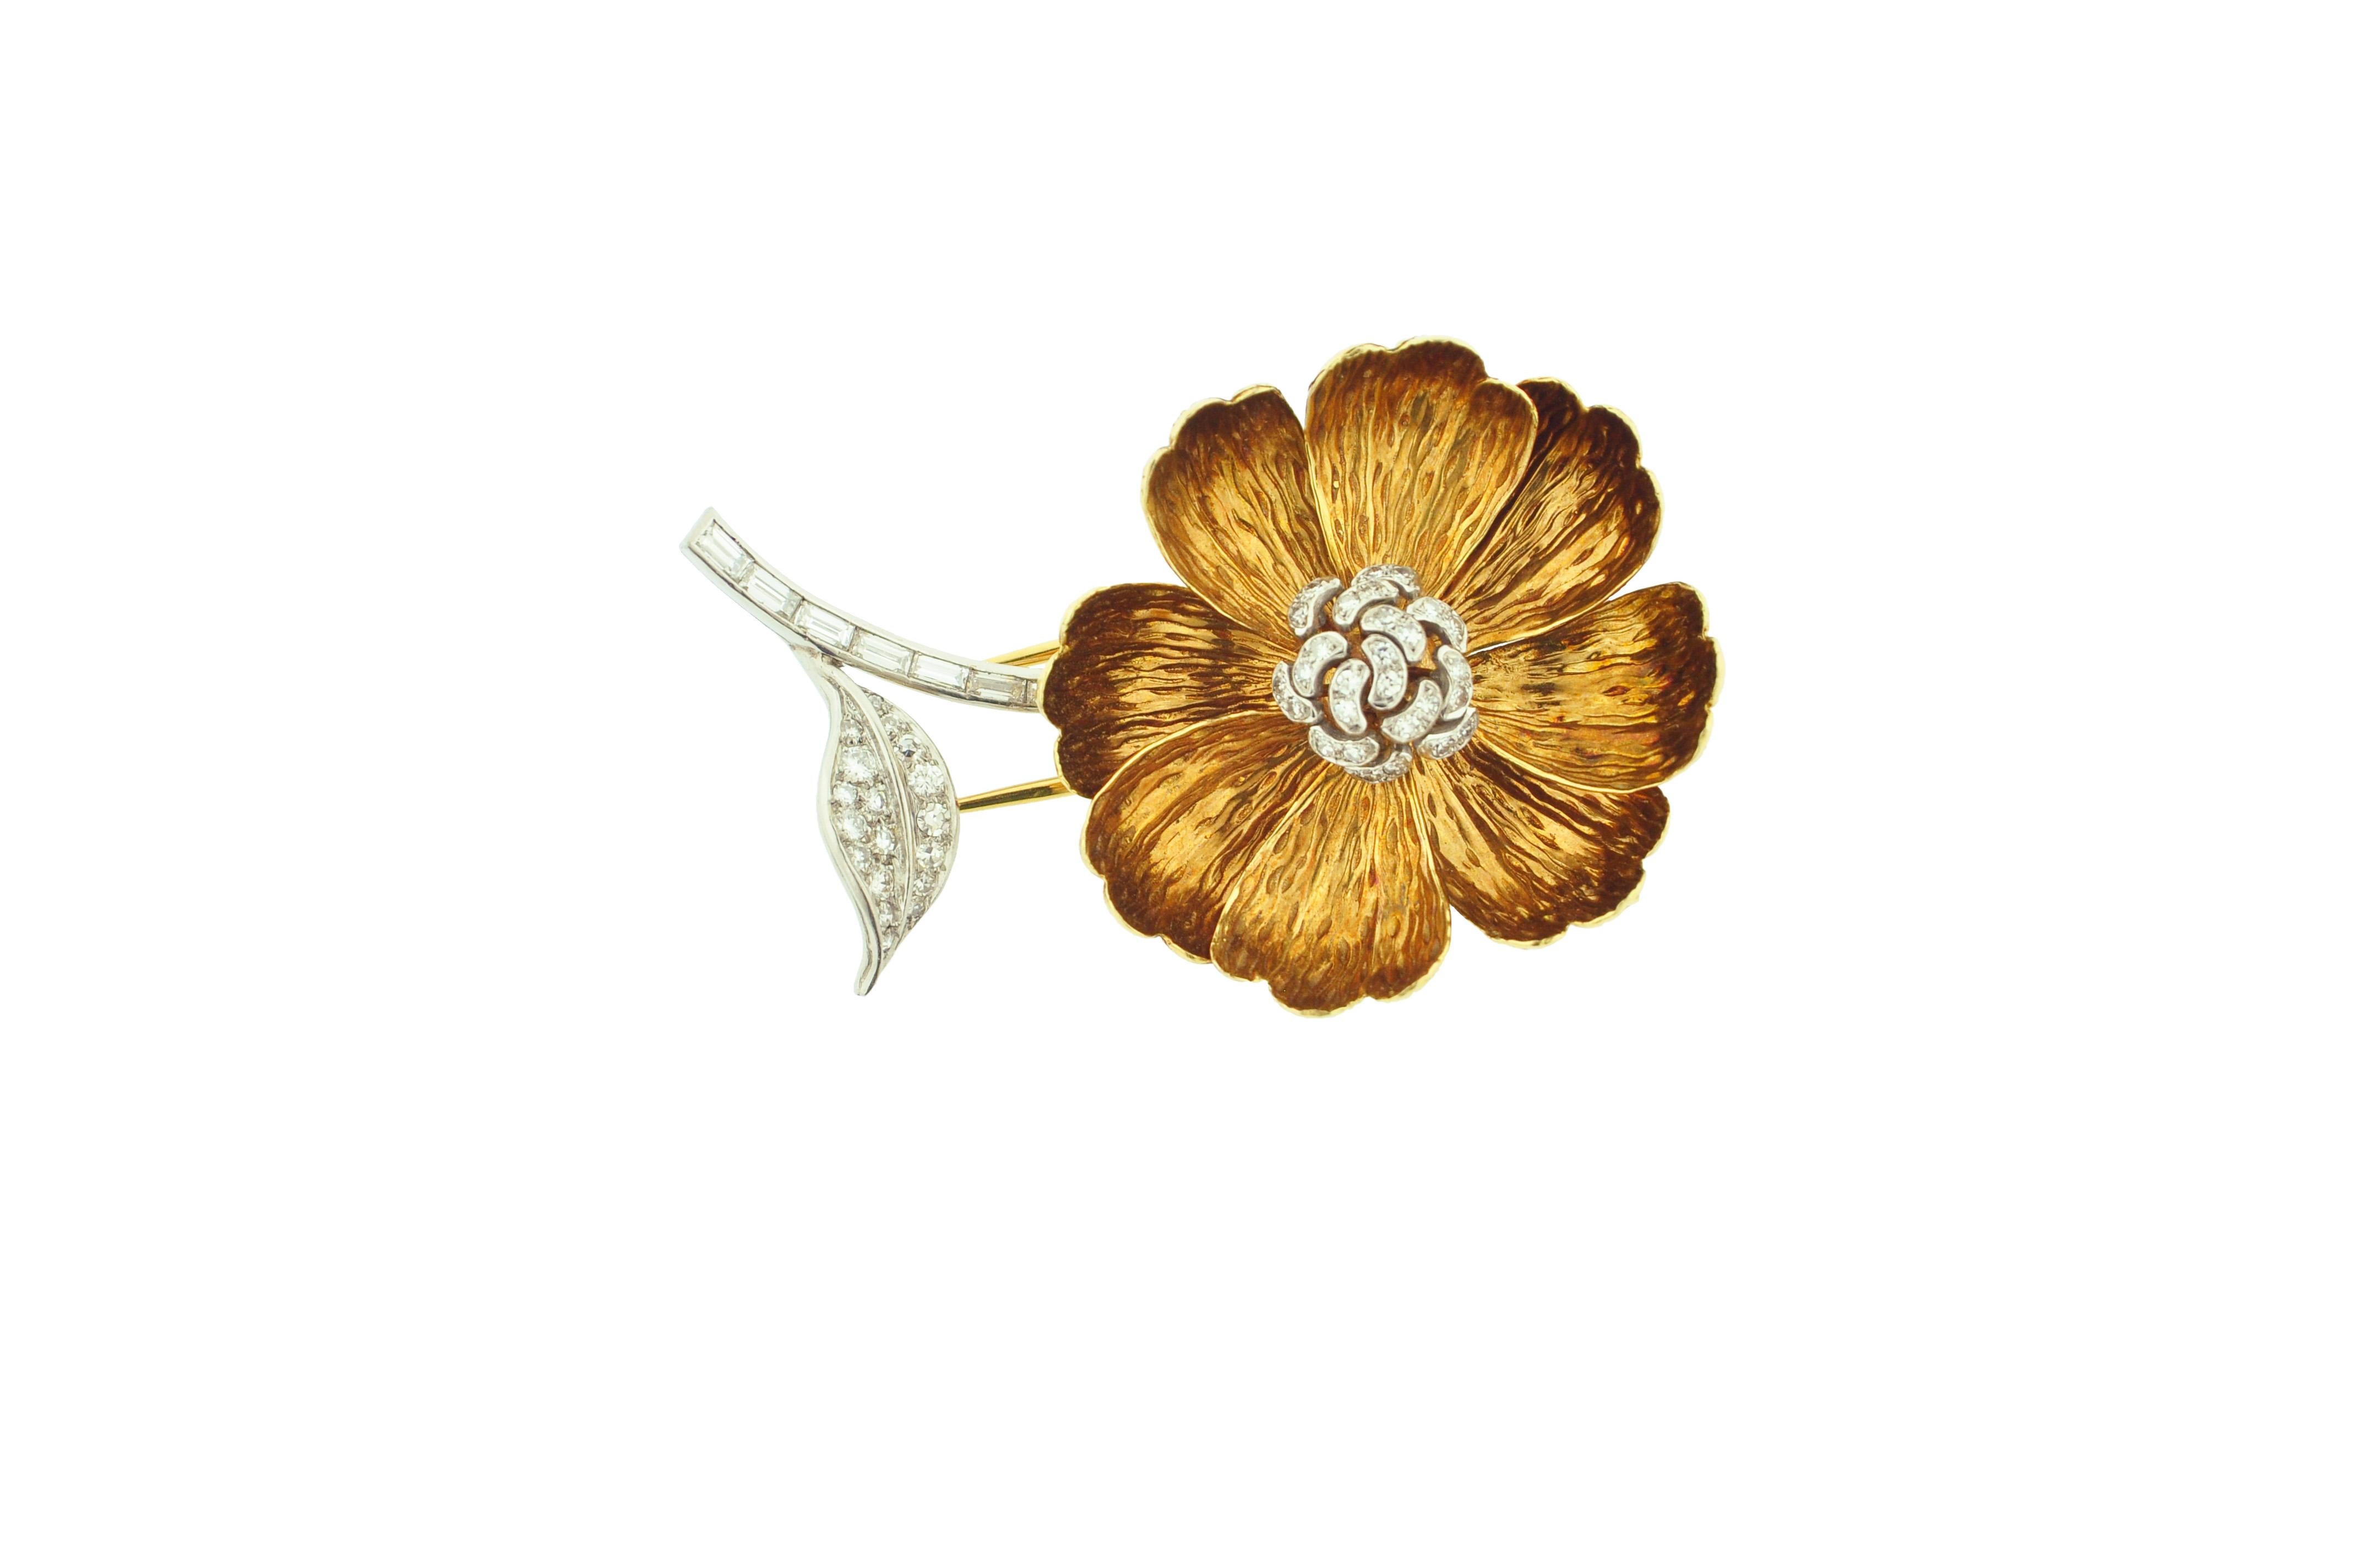 Boucheron Diamond and Gold Flower Brooch In Excellent Condition For Sale In New York, NY